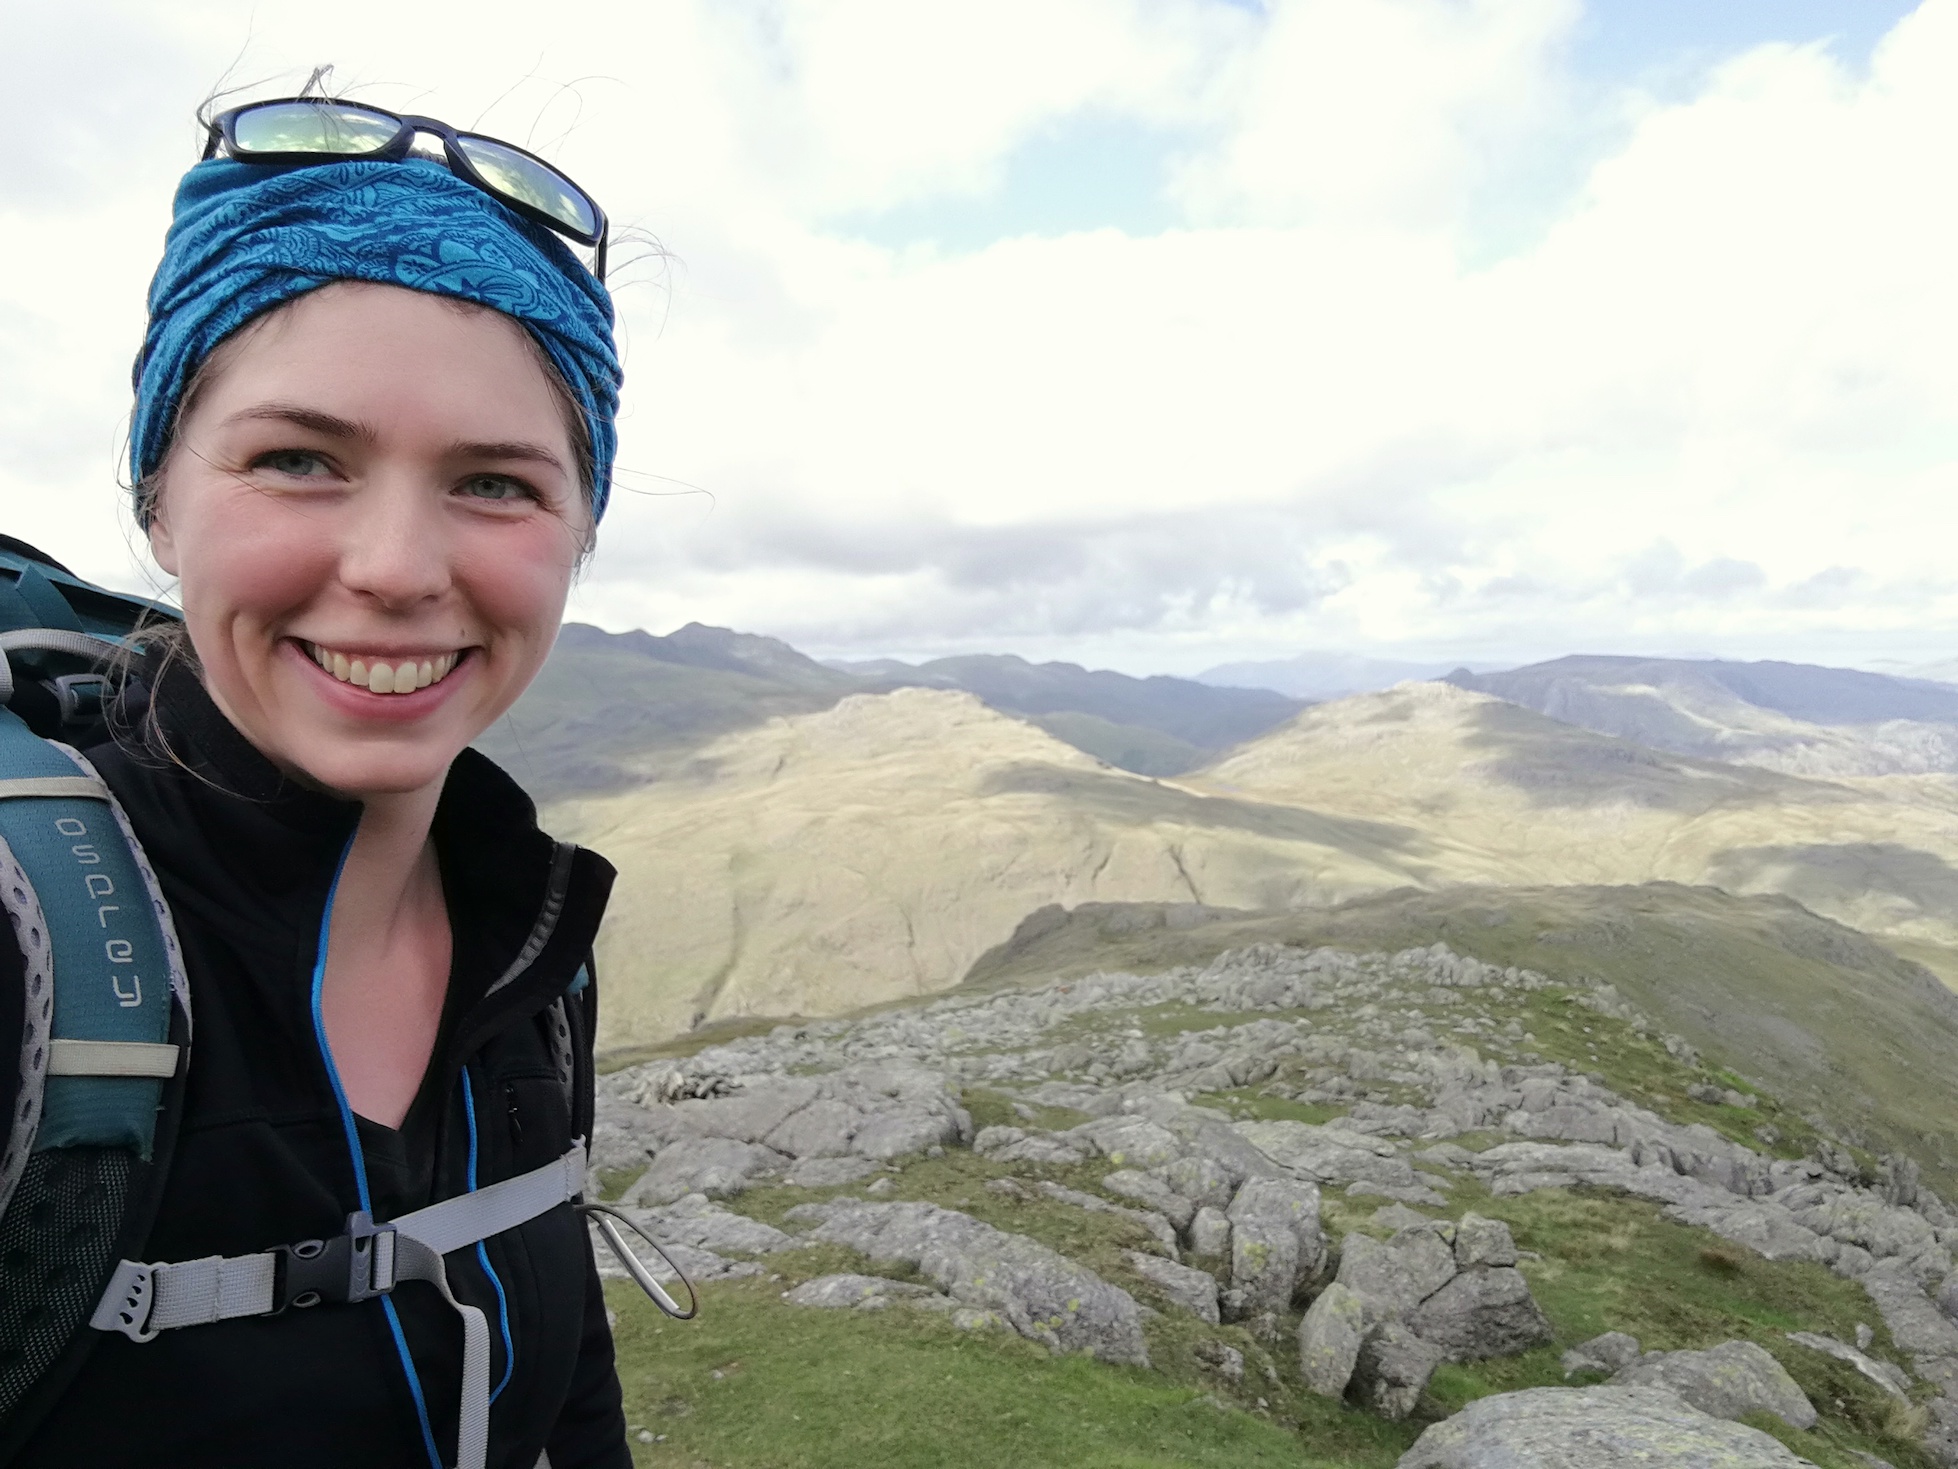 “Tinged with fear” - how safe do women feel in the great outdoors ...